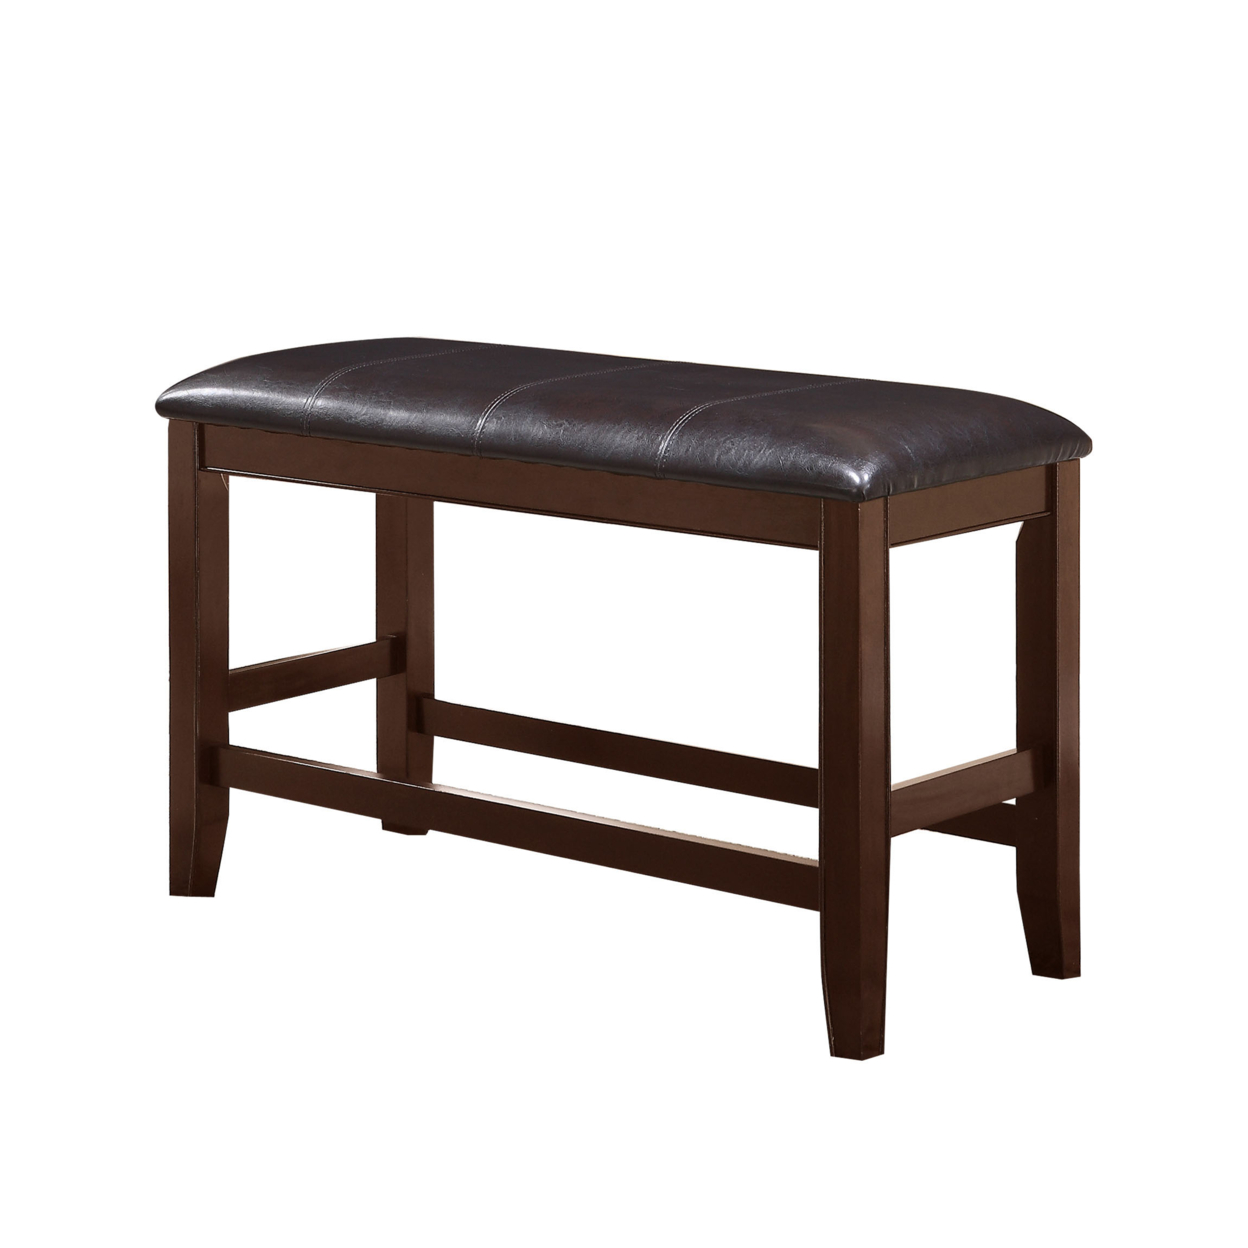 Wooden Counter Height Bench With Leatherette Seat, Brown And Black- Saltoro Sherpi